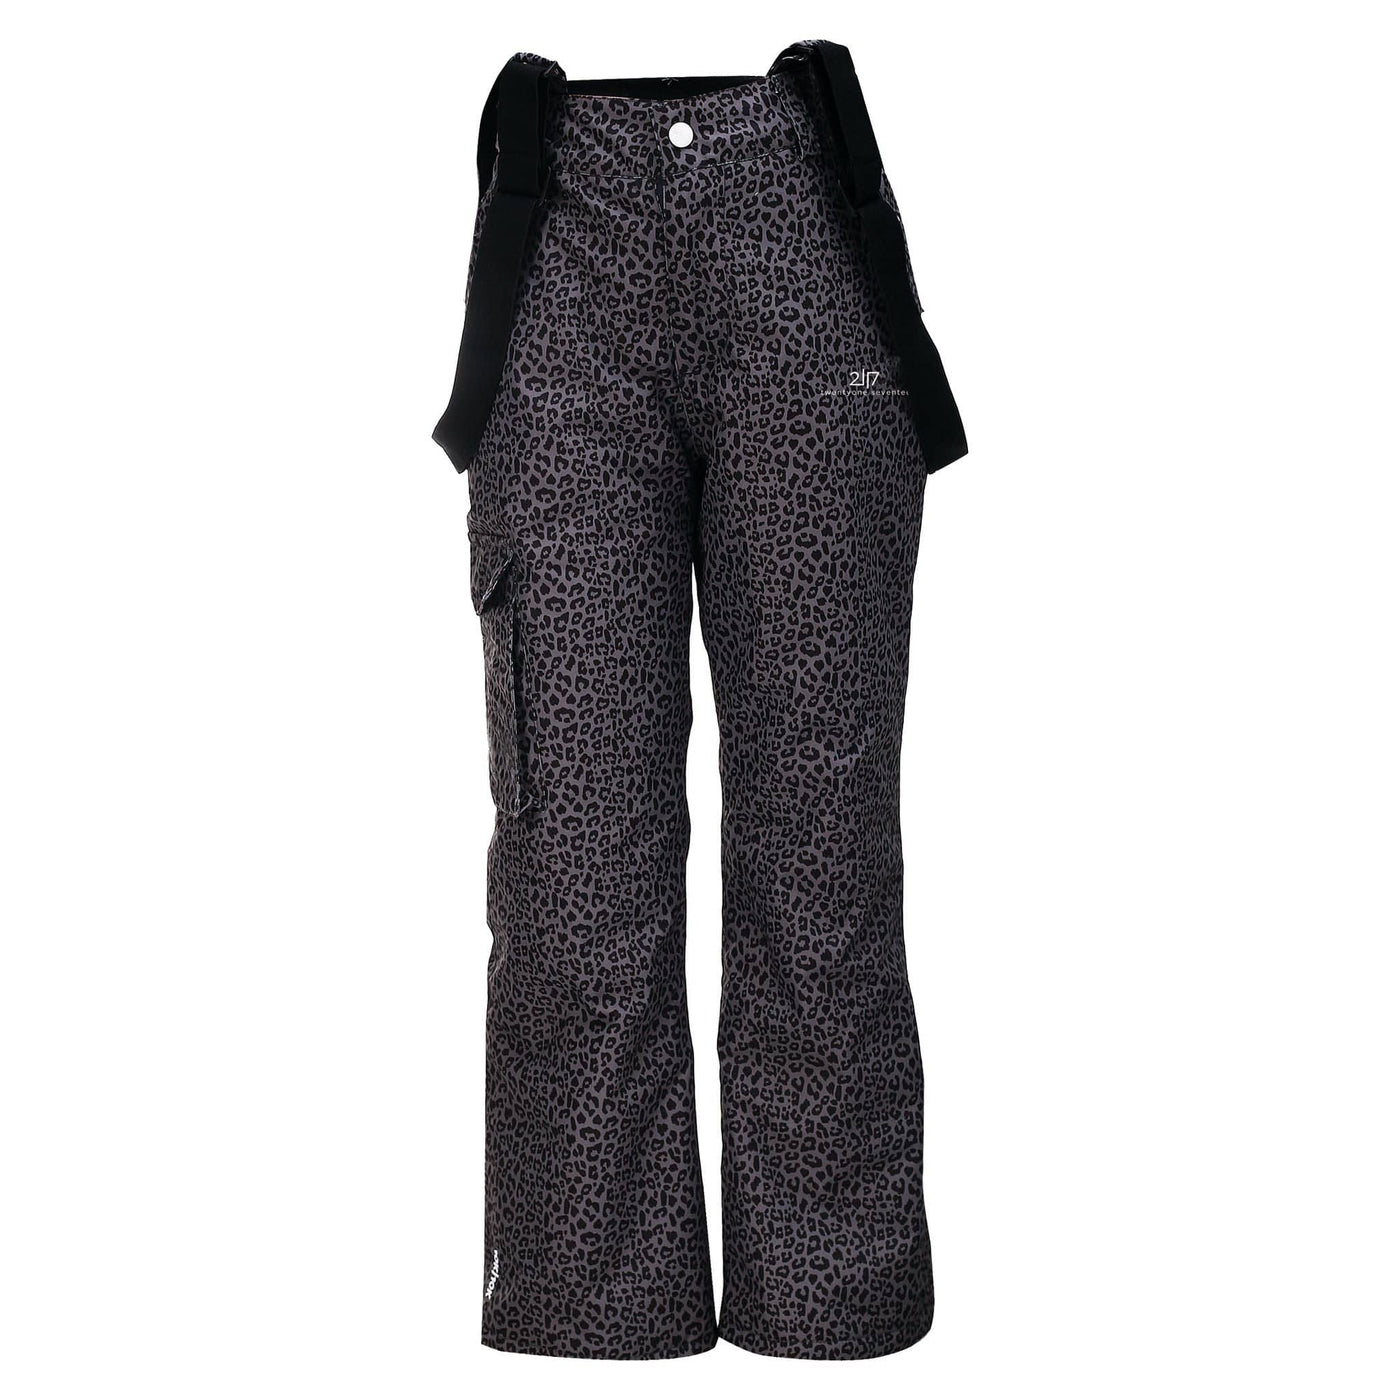 SnowKids Outerwear Pants 128cm/8-9Y 2117 Of Sweden Junior Tallberg Padded Ski Pant - Spotted